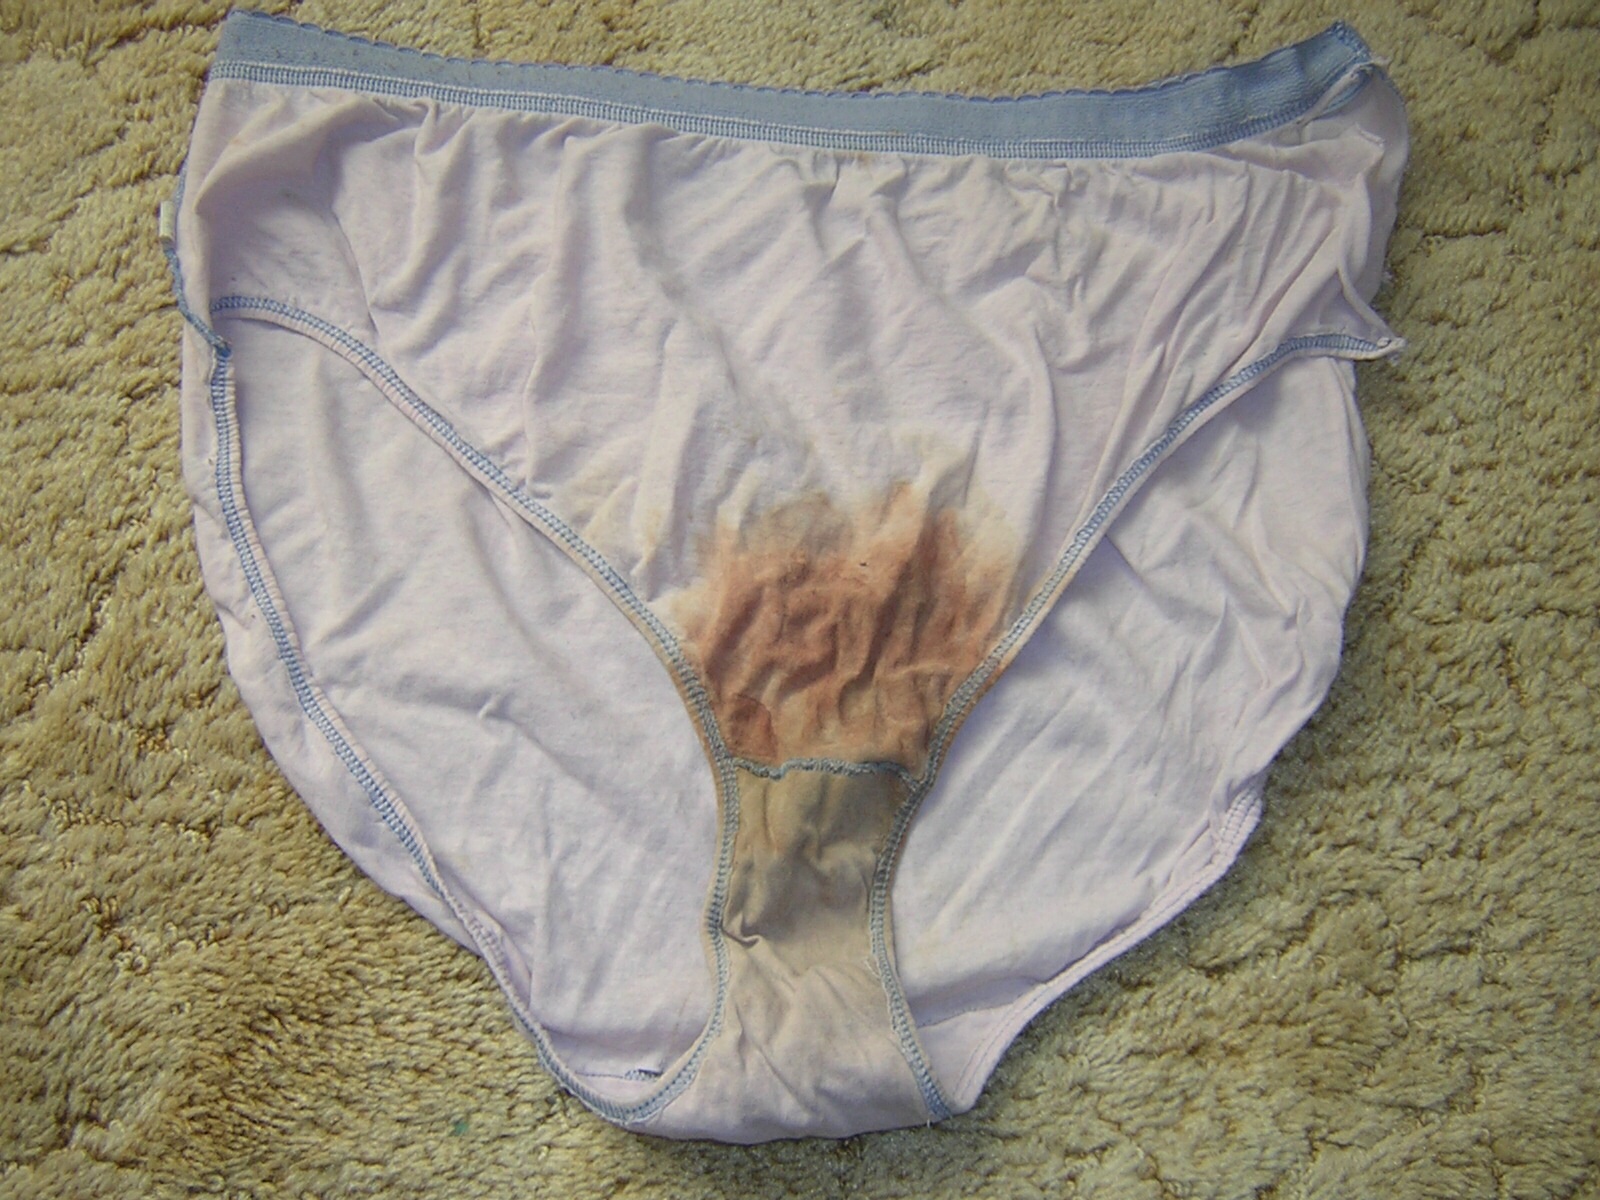 Period stained panties Blank Template - Imgflip